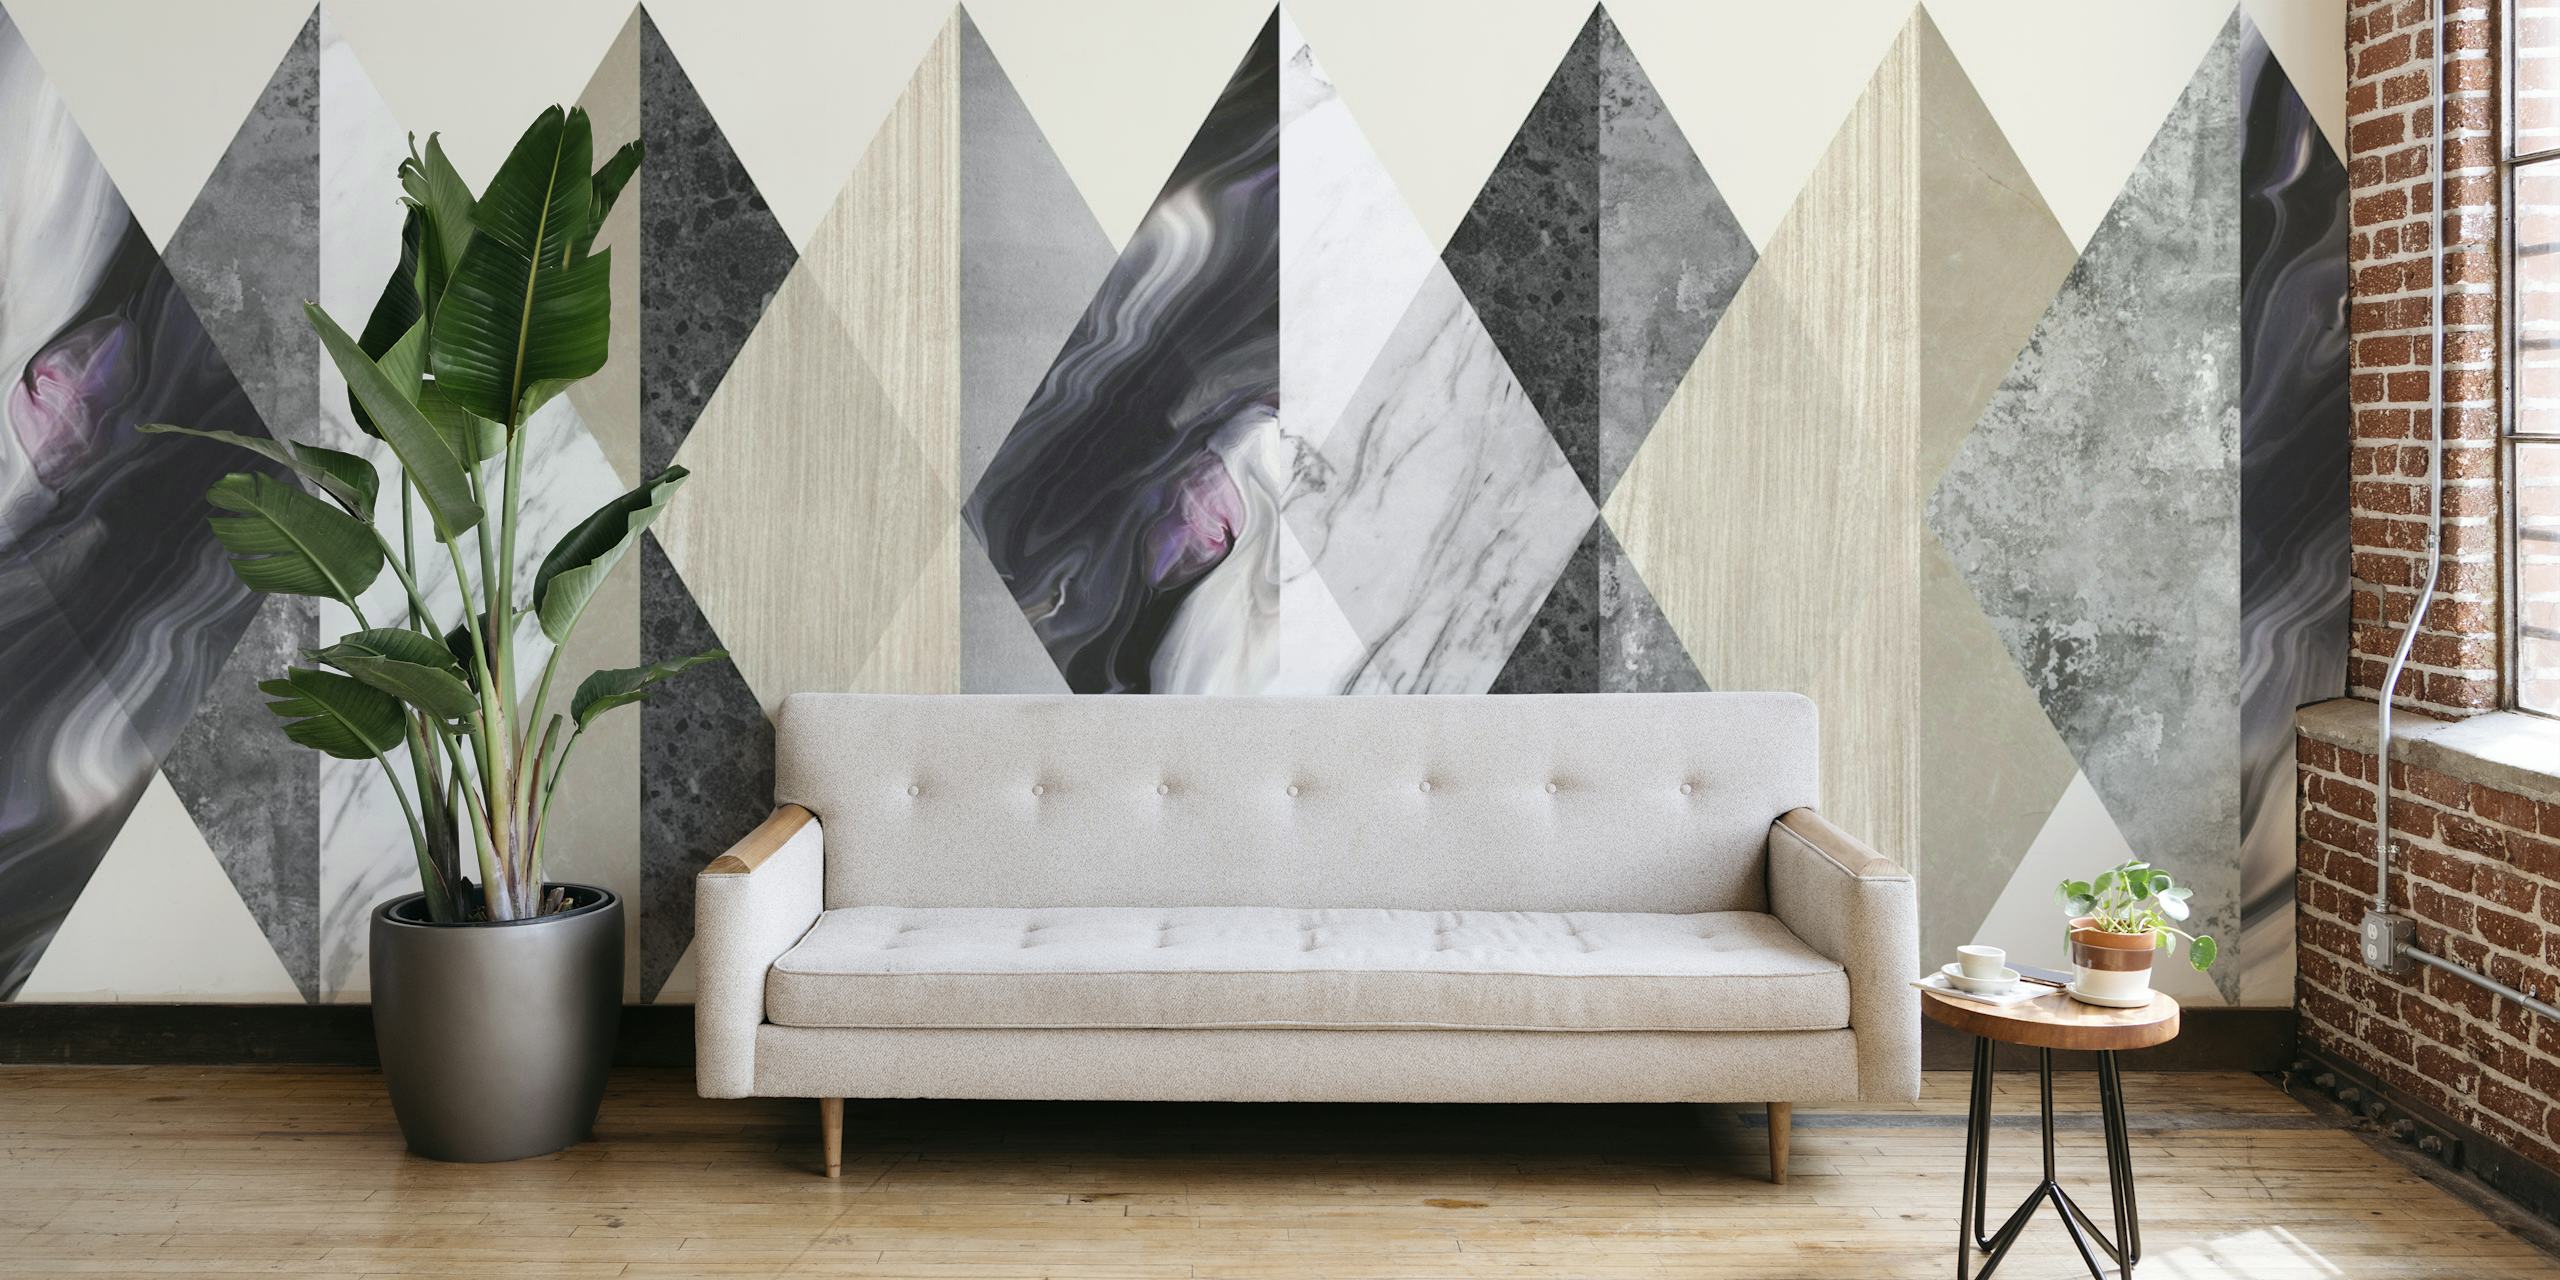 Elegant geometric pattern with marbled textures wall mural